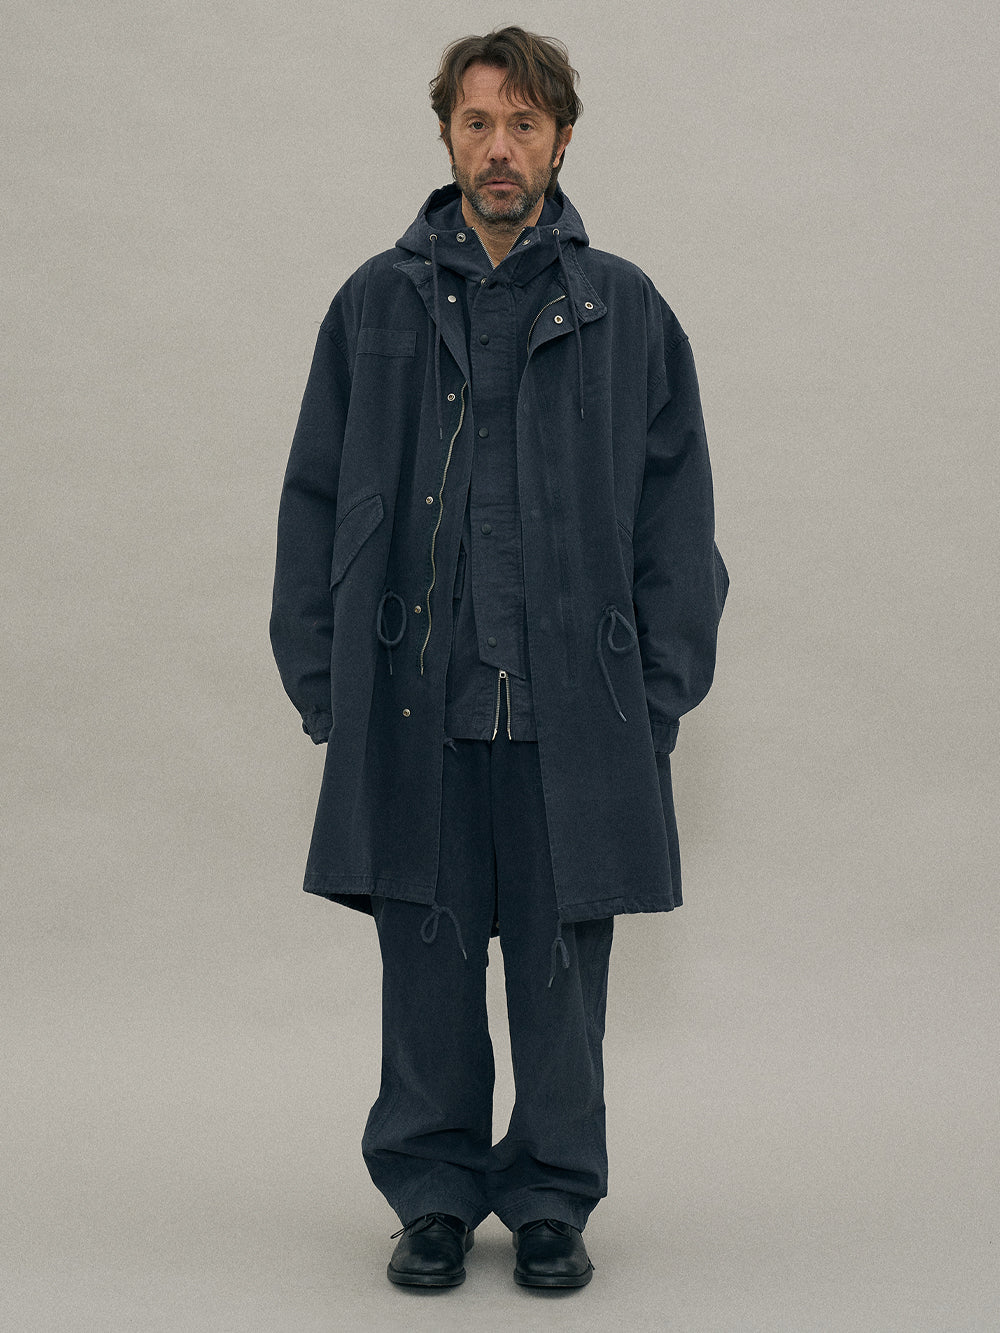 Vintage Washed M-65 Fishtail Coat in Navy